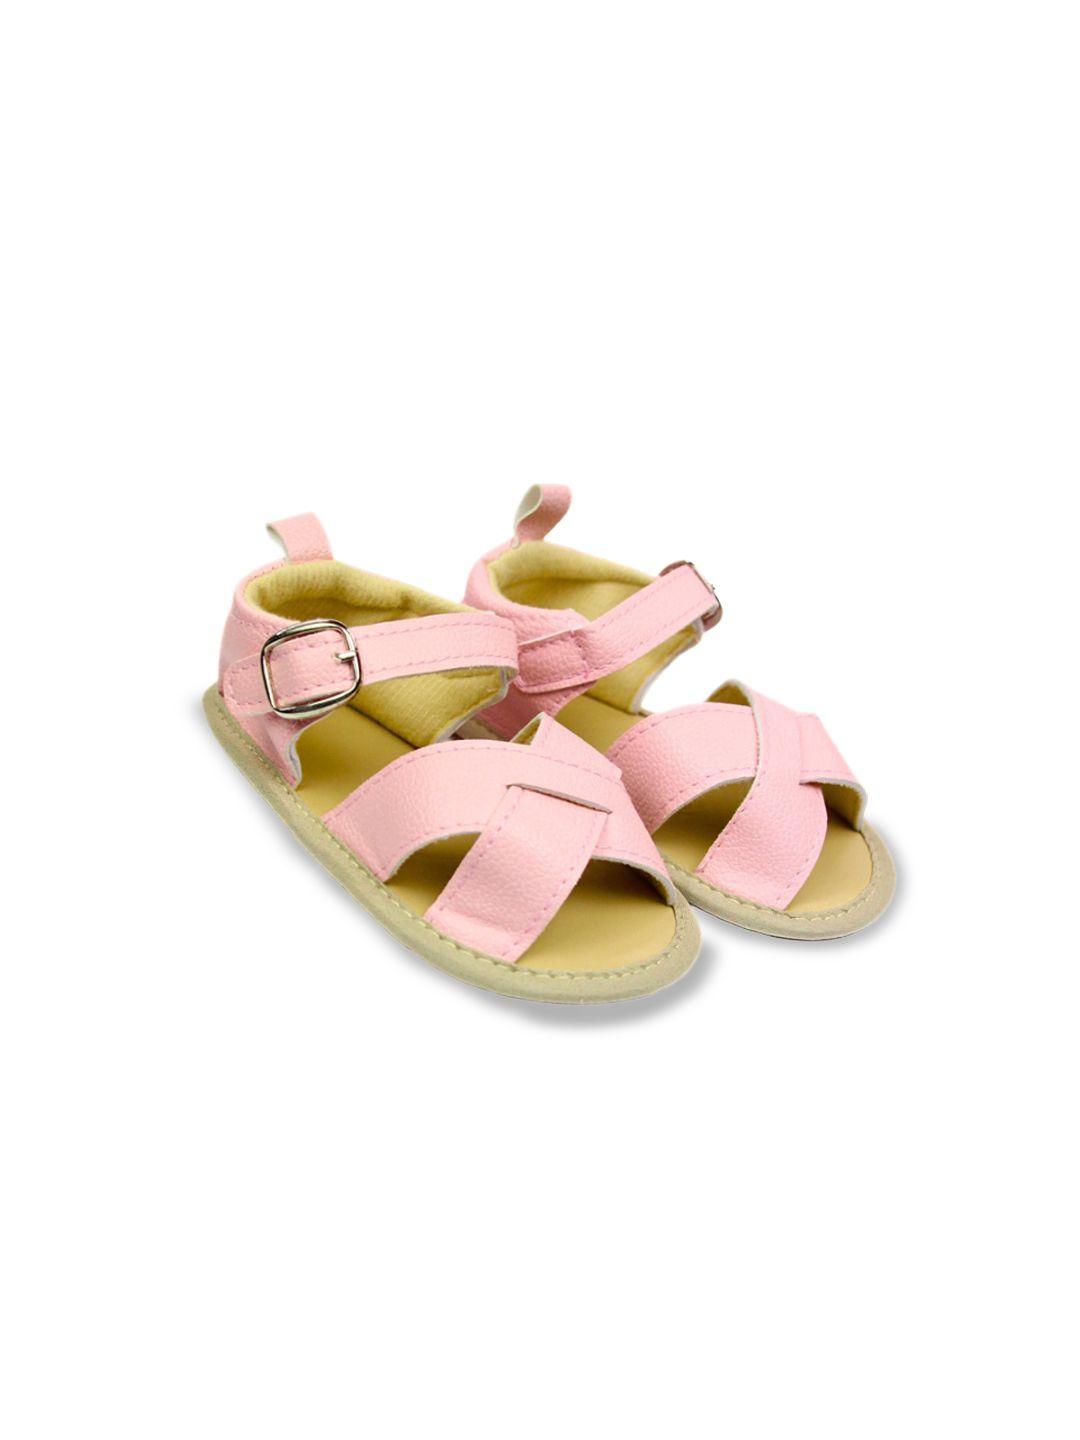 baesd-infant-kids-open-toe-flats-with-buckles